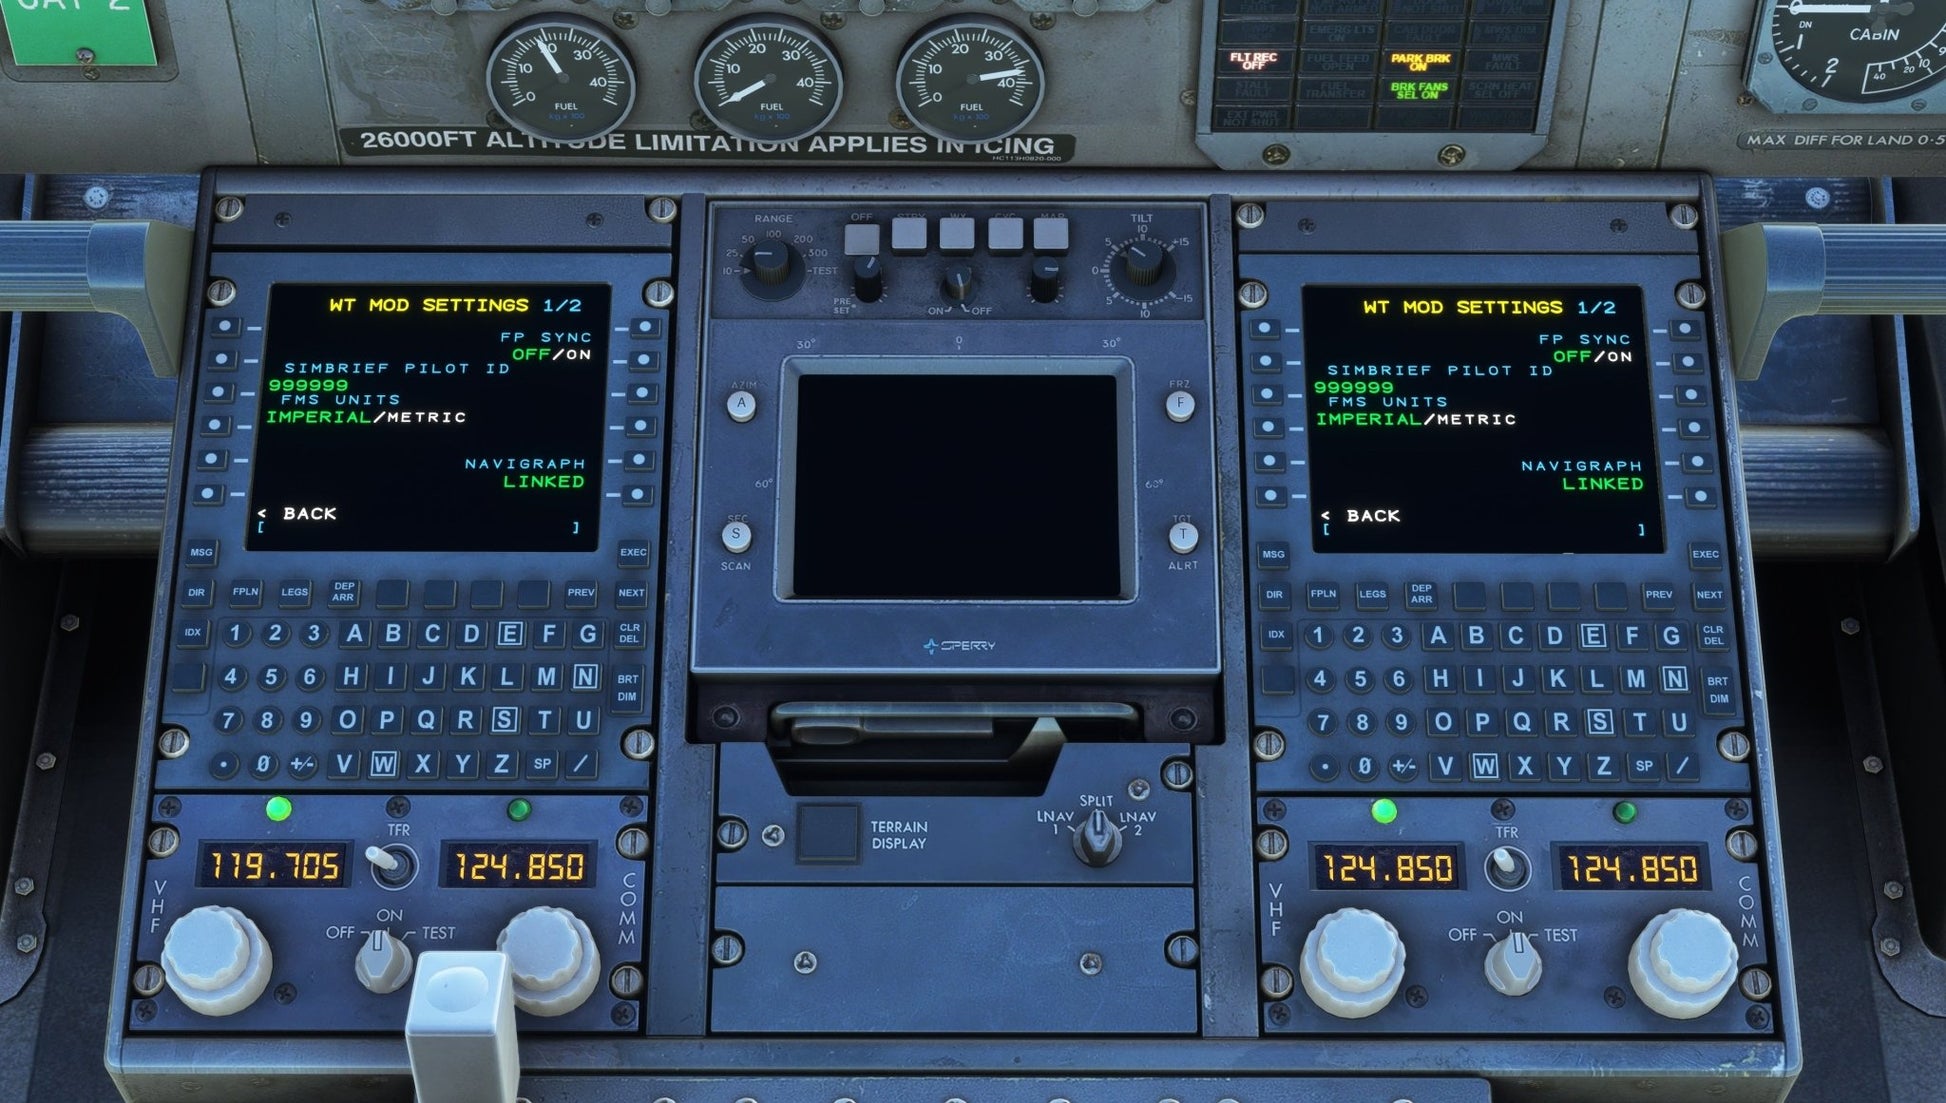 Just Flight BAE-146 Professional for MSFS2020 - ProdesksimJust Flight BAE-146 Professional for MSFS2020SoftwareProdesksimJust Flight BAE-146 Professional for MSFS2020